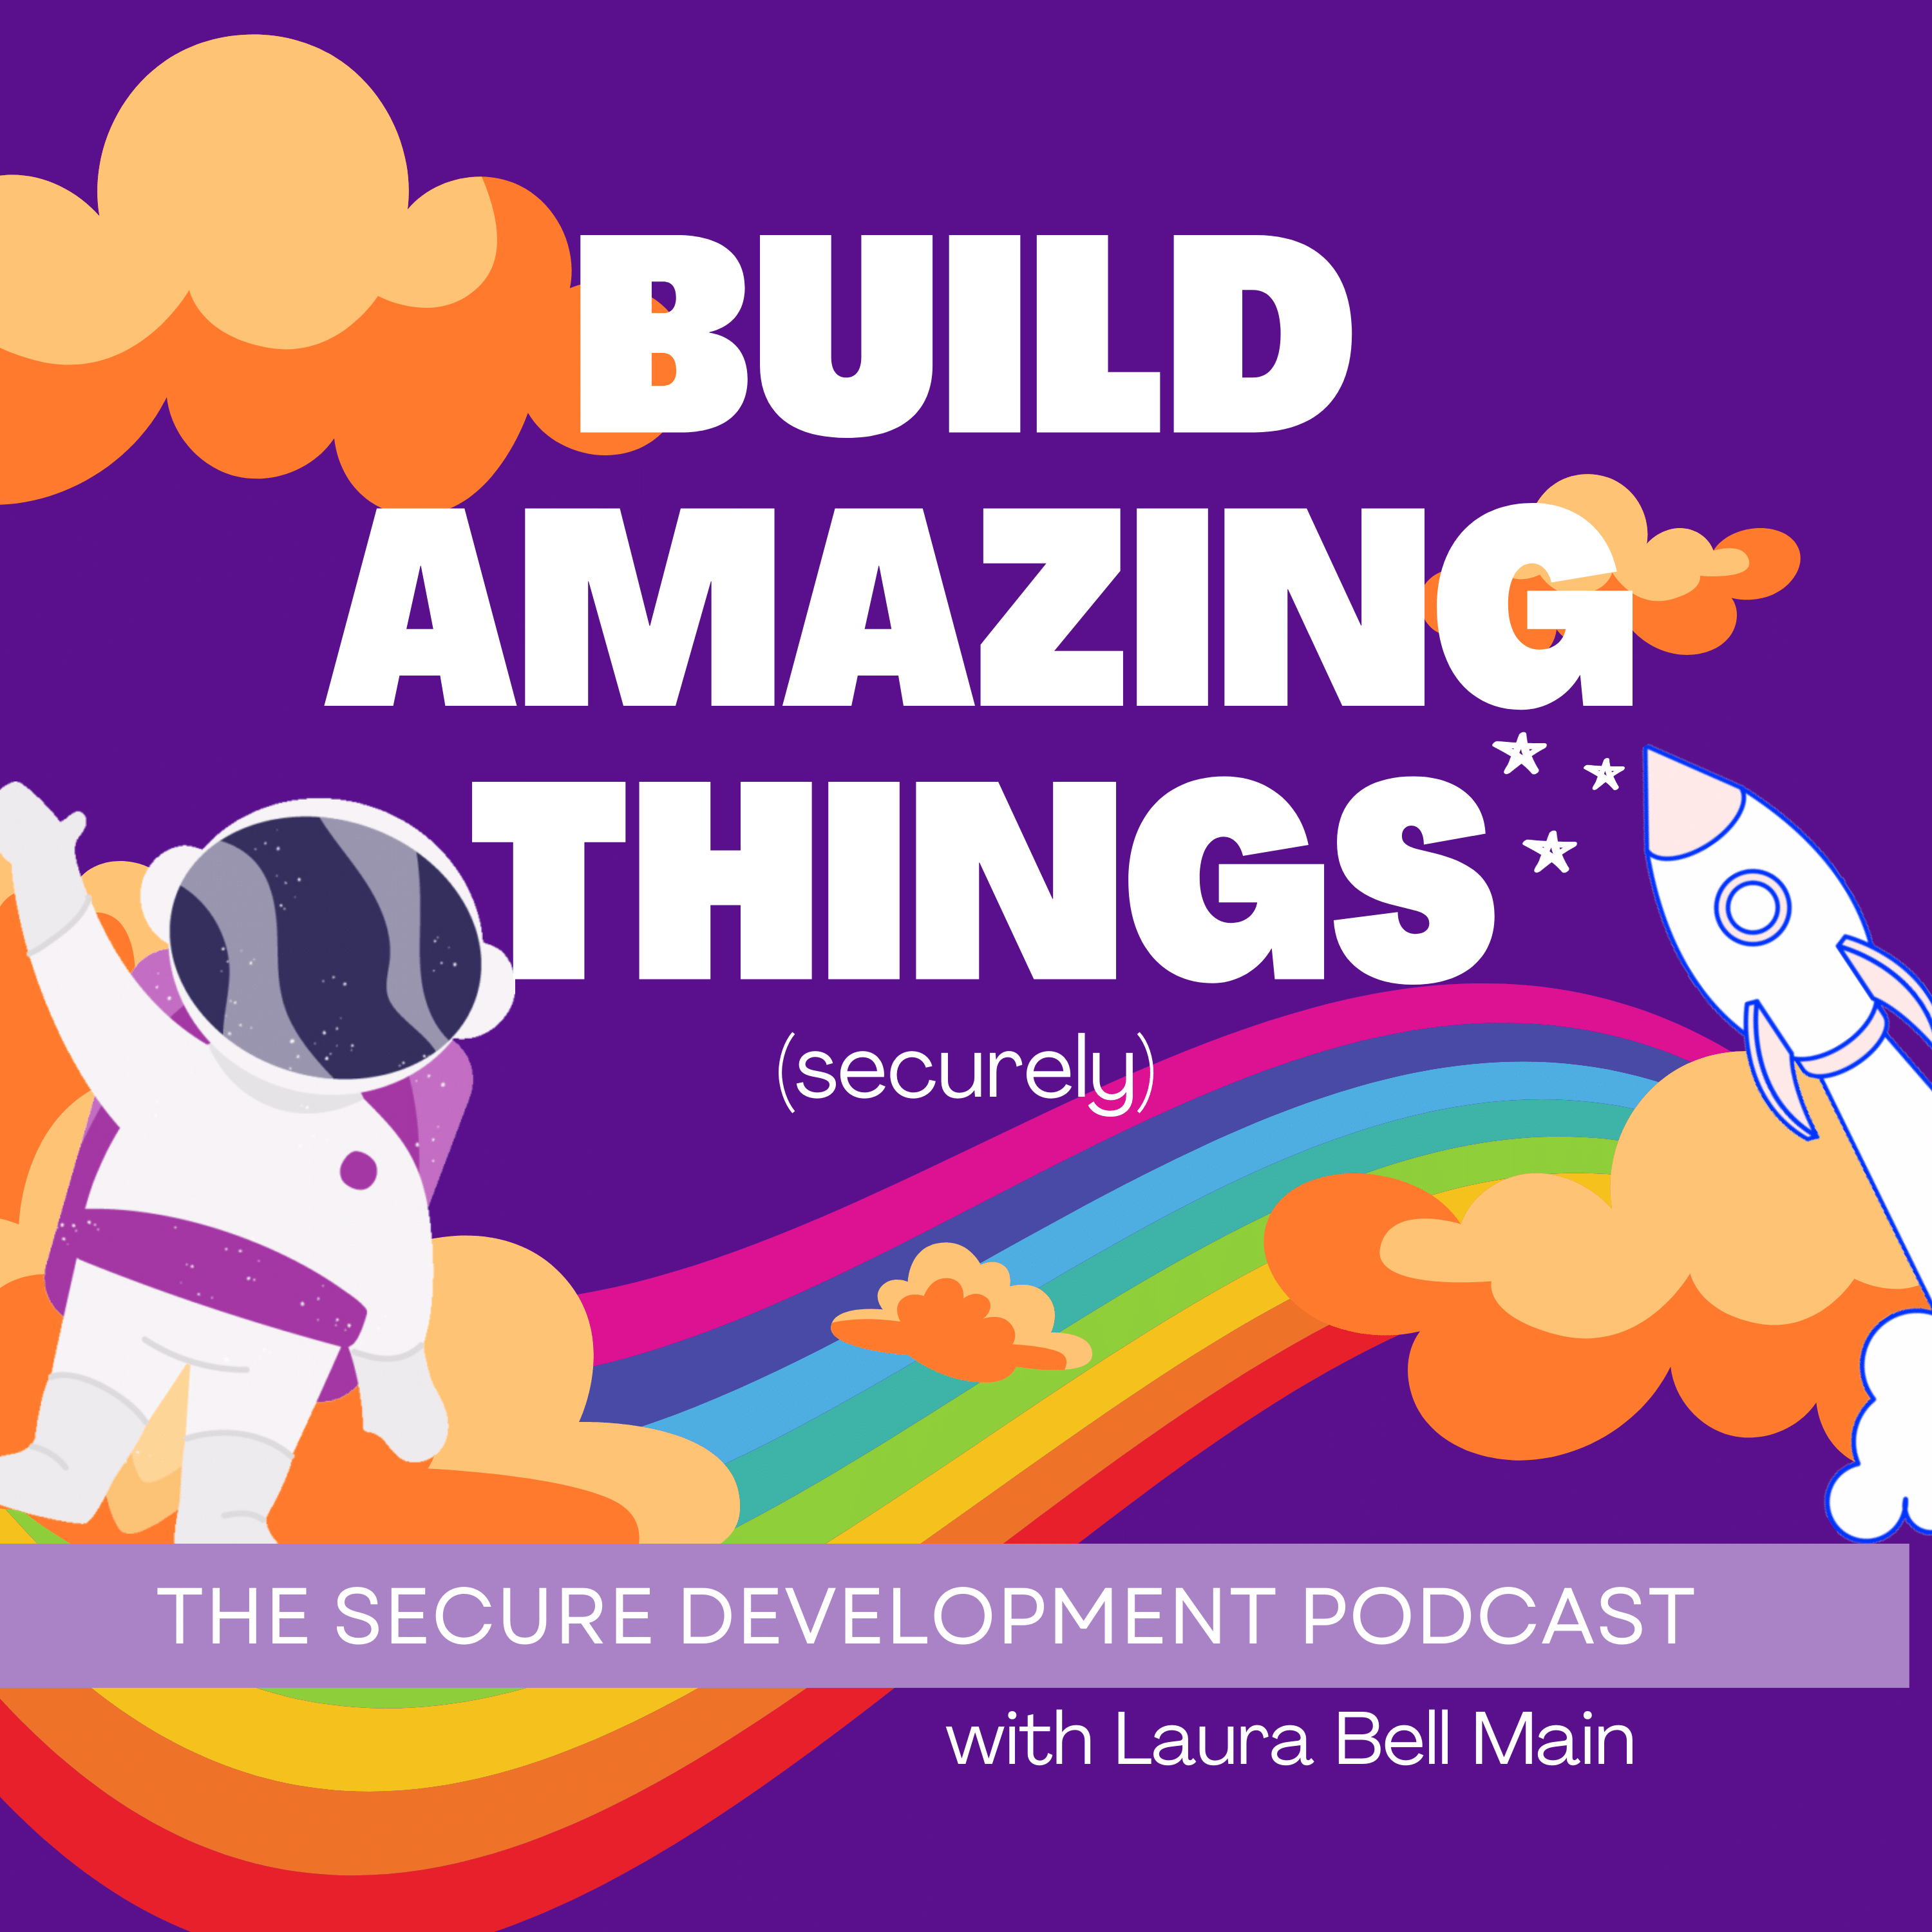 Artwork for podcast Build Amazing Things (securely)